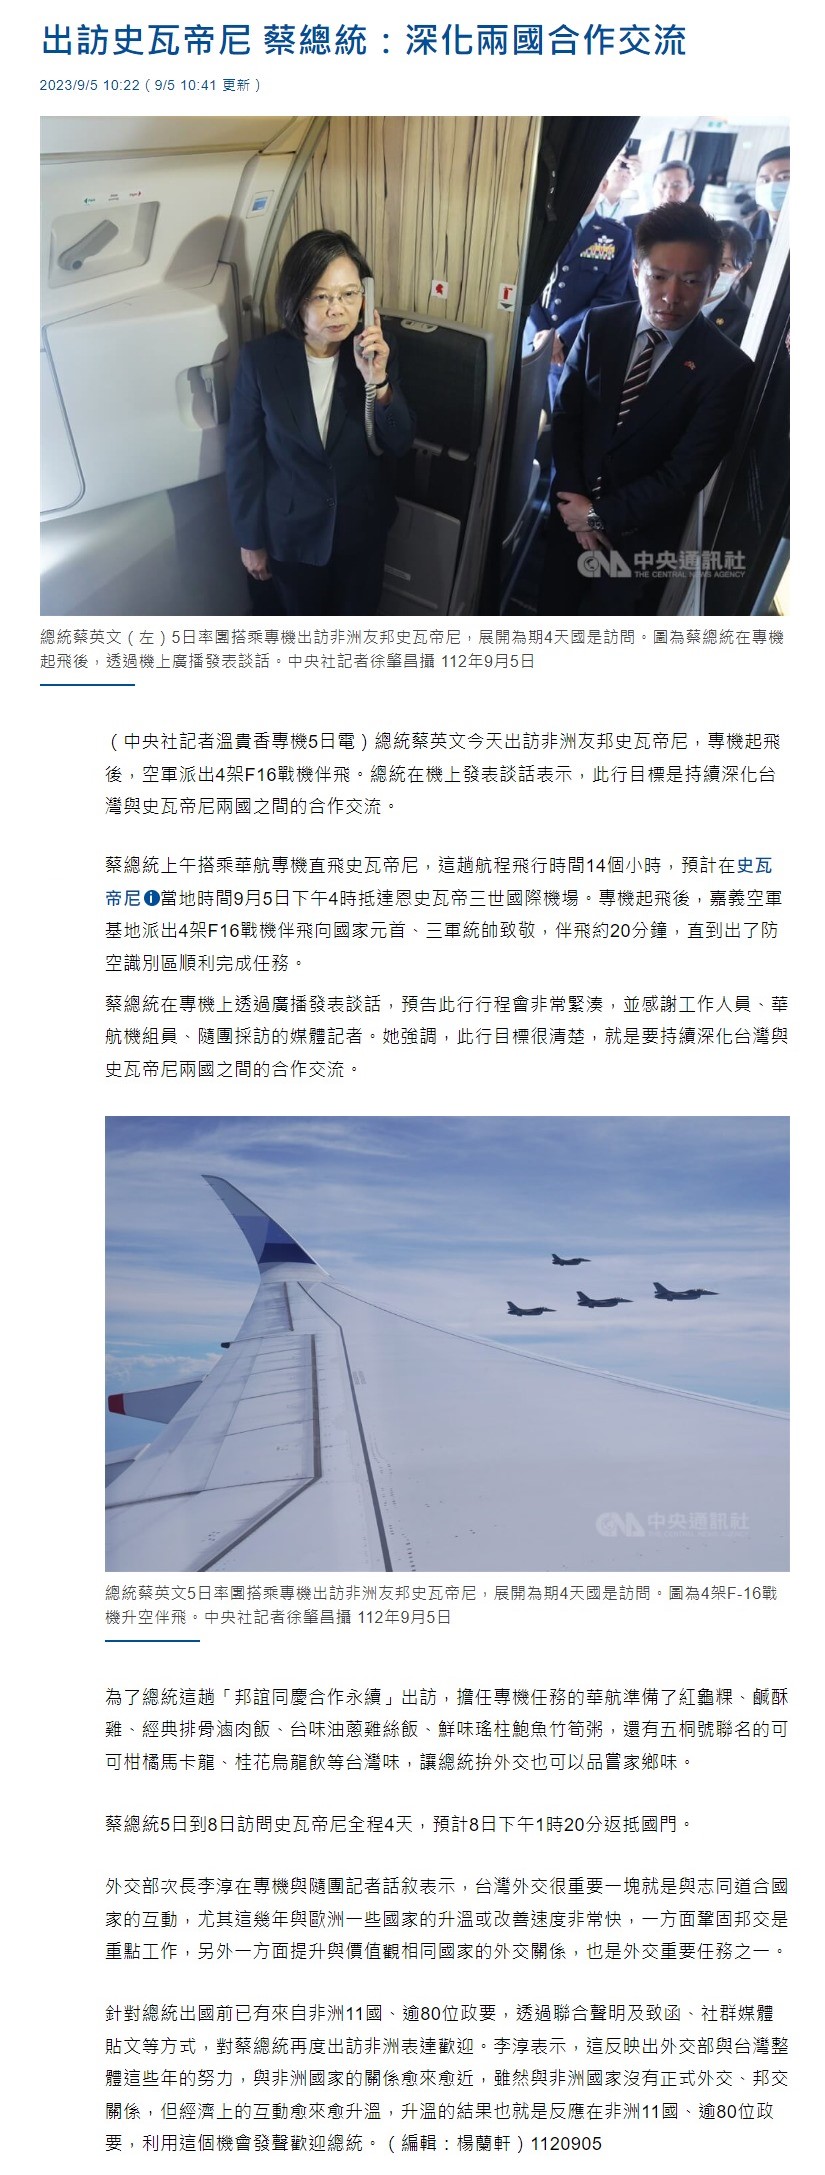 Four F-16s escort presidential flight, Tsai's on-flight remarks: let's give our all for Taiwan's diplomacy